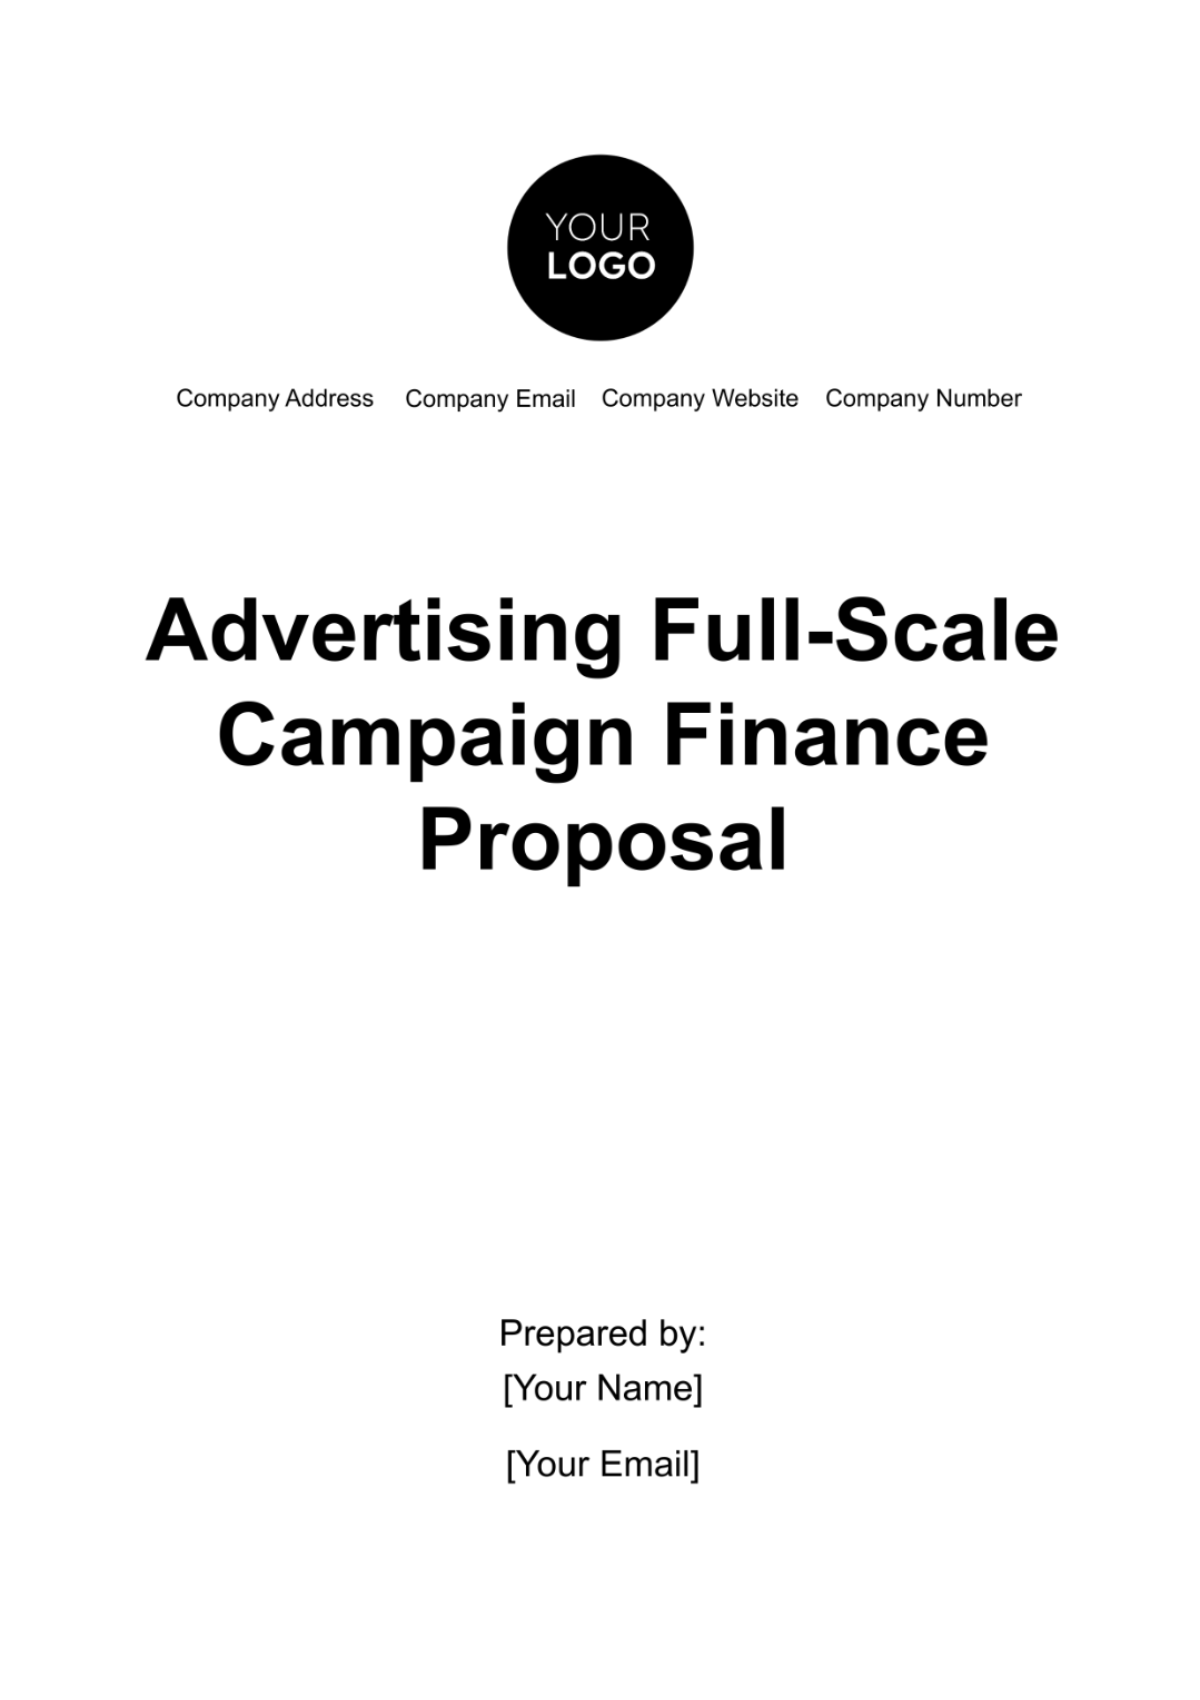 Free Advertising Full-Scale Campaign Finance Proposal Template